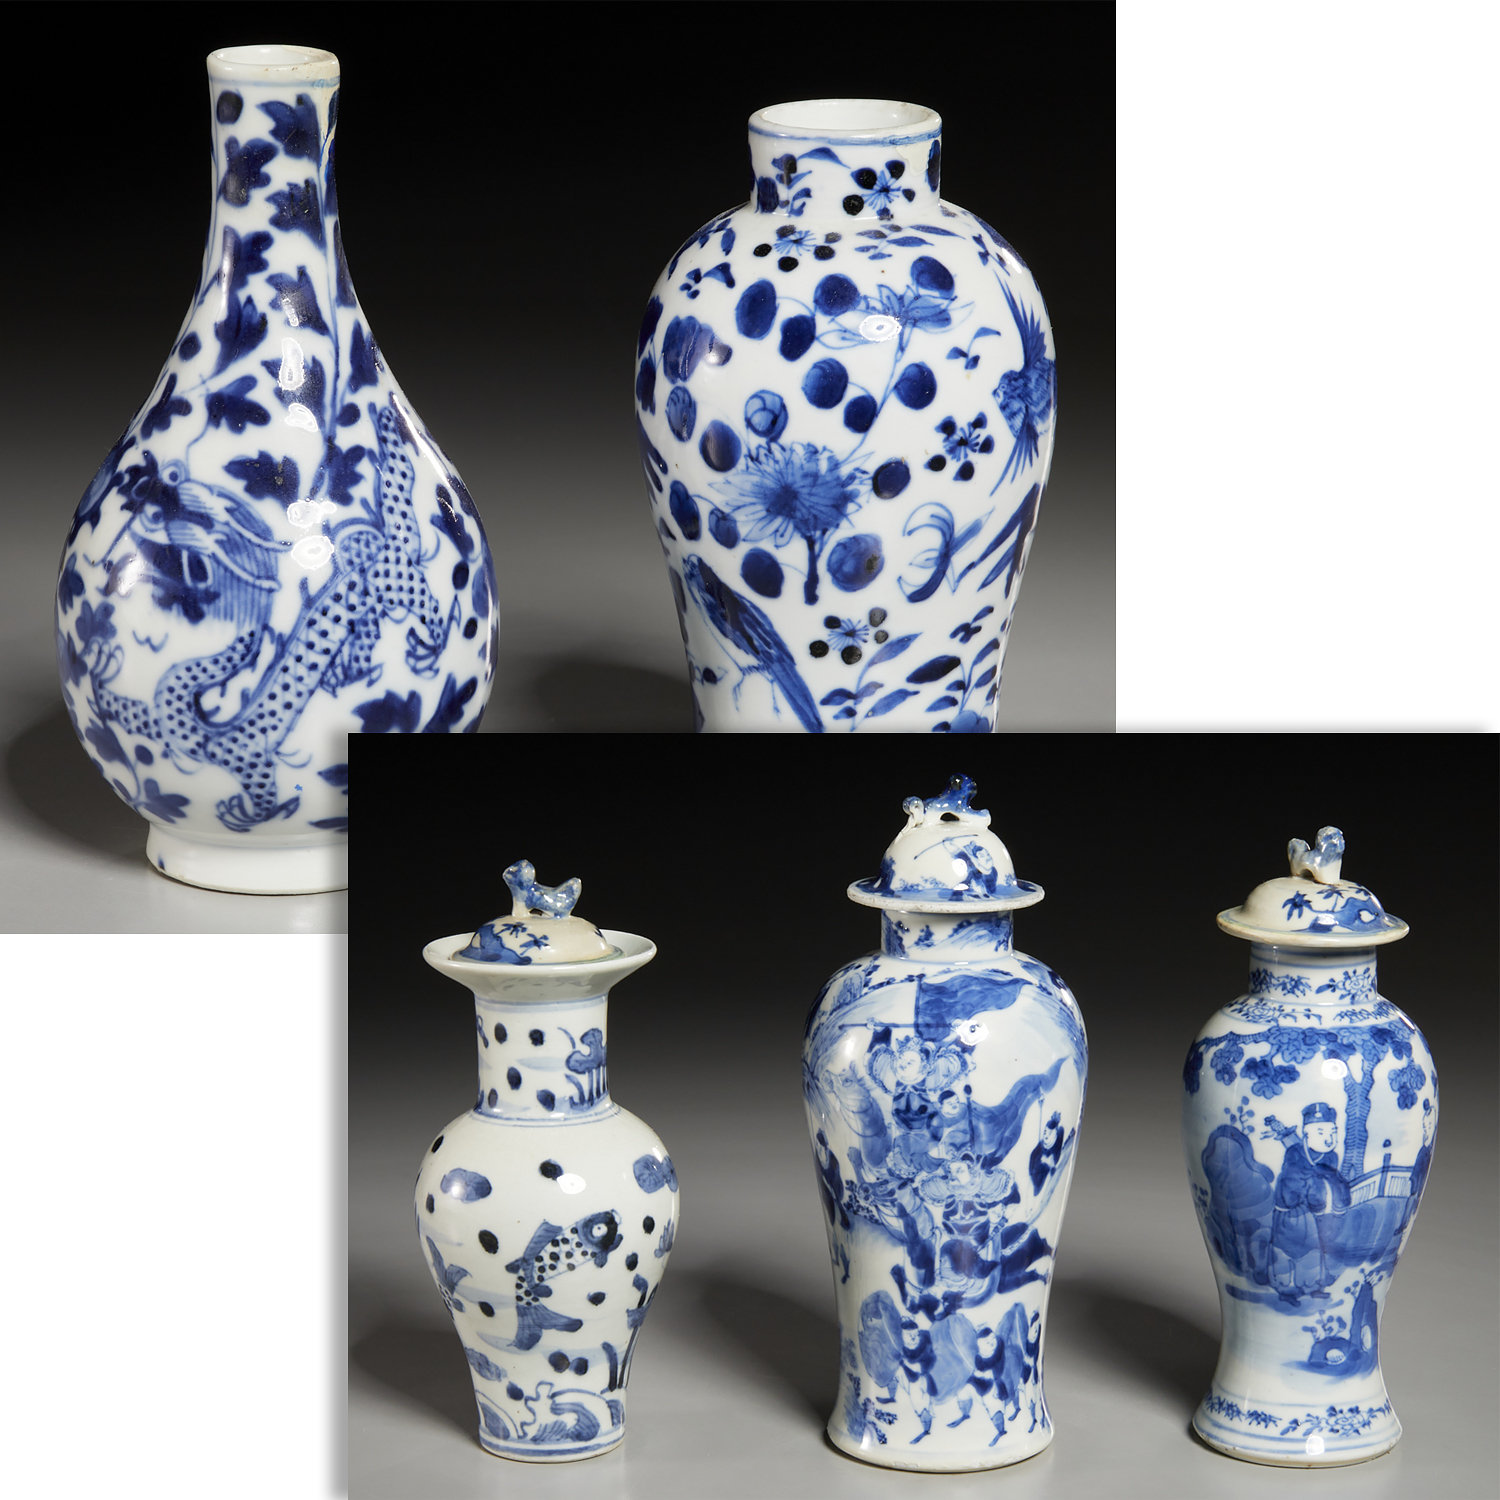  5 ANTIQUE CHINESE BLUE WHITE 2fbea5